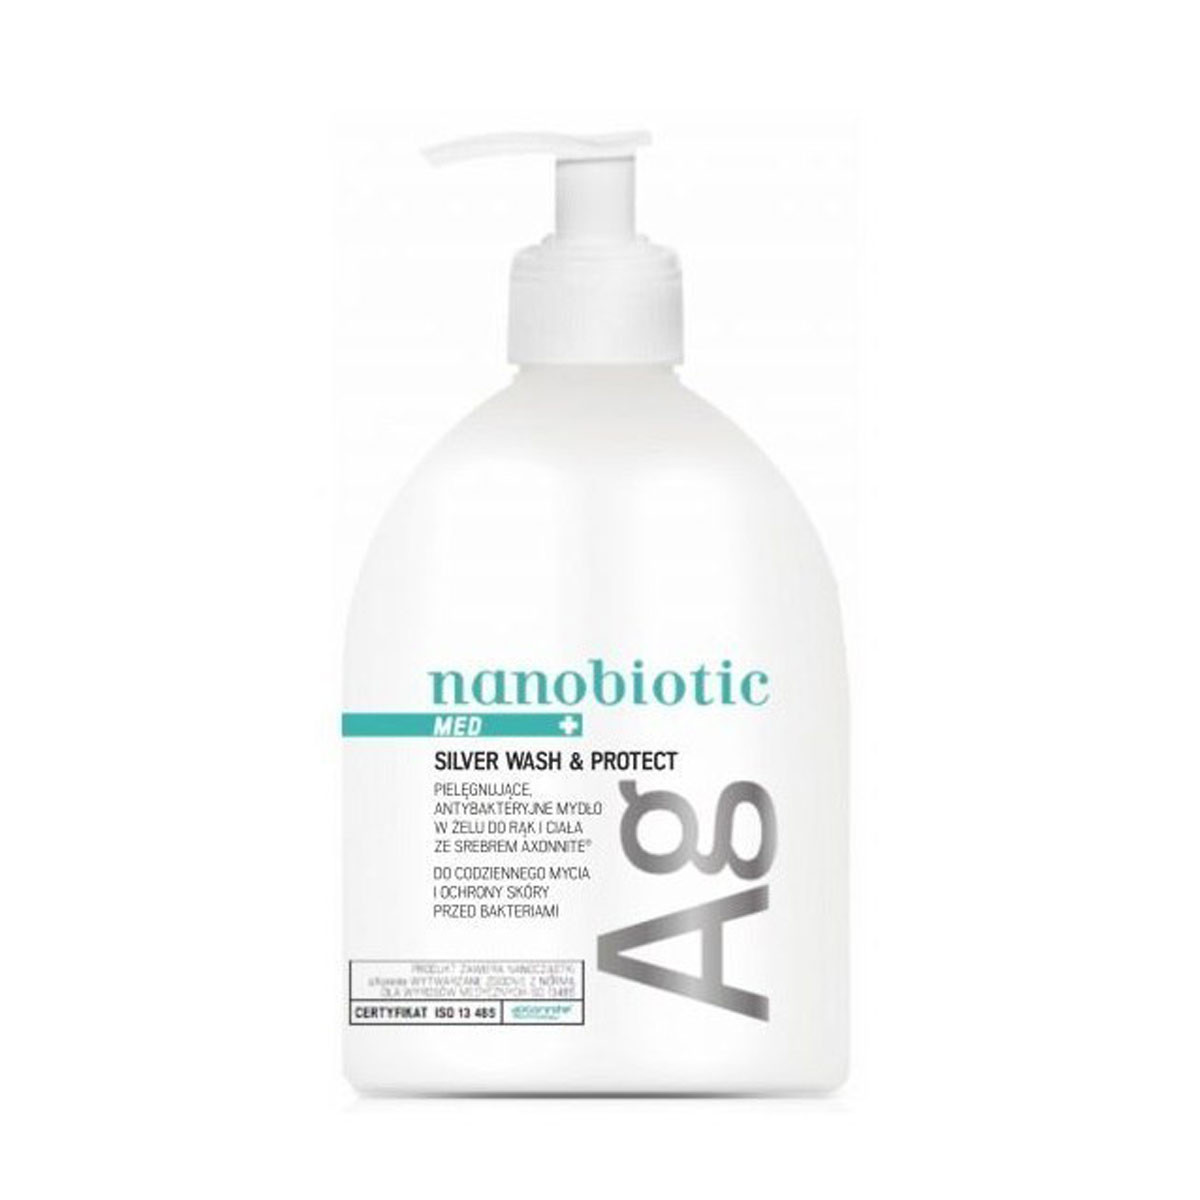 Nanobiotic MED silver wash and protect